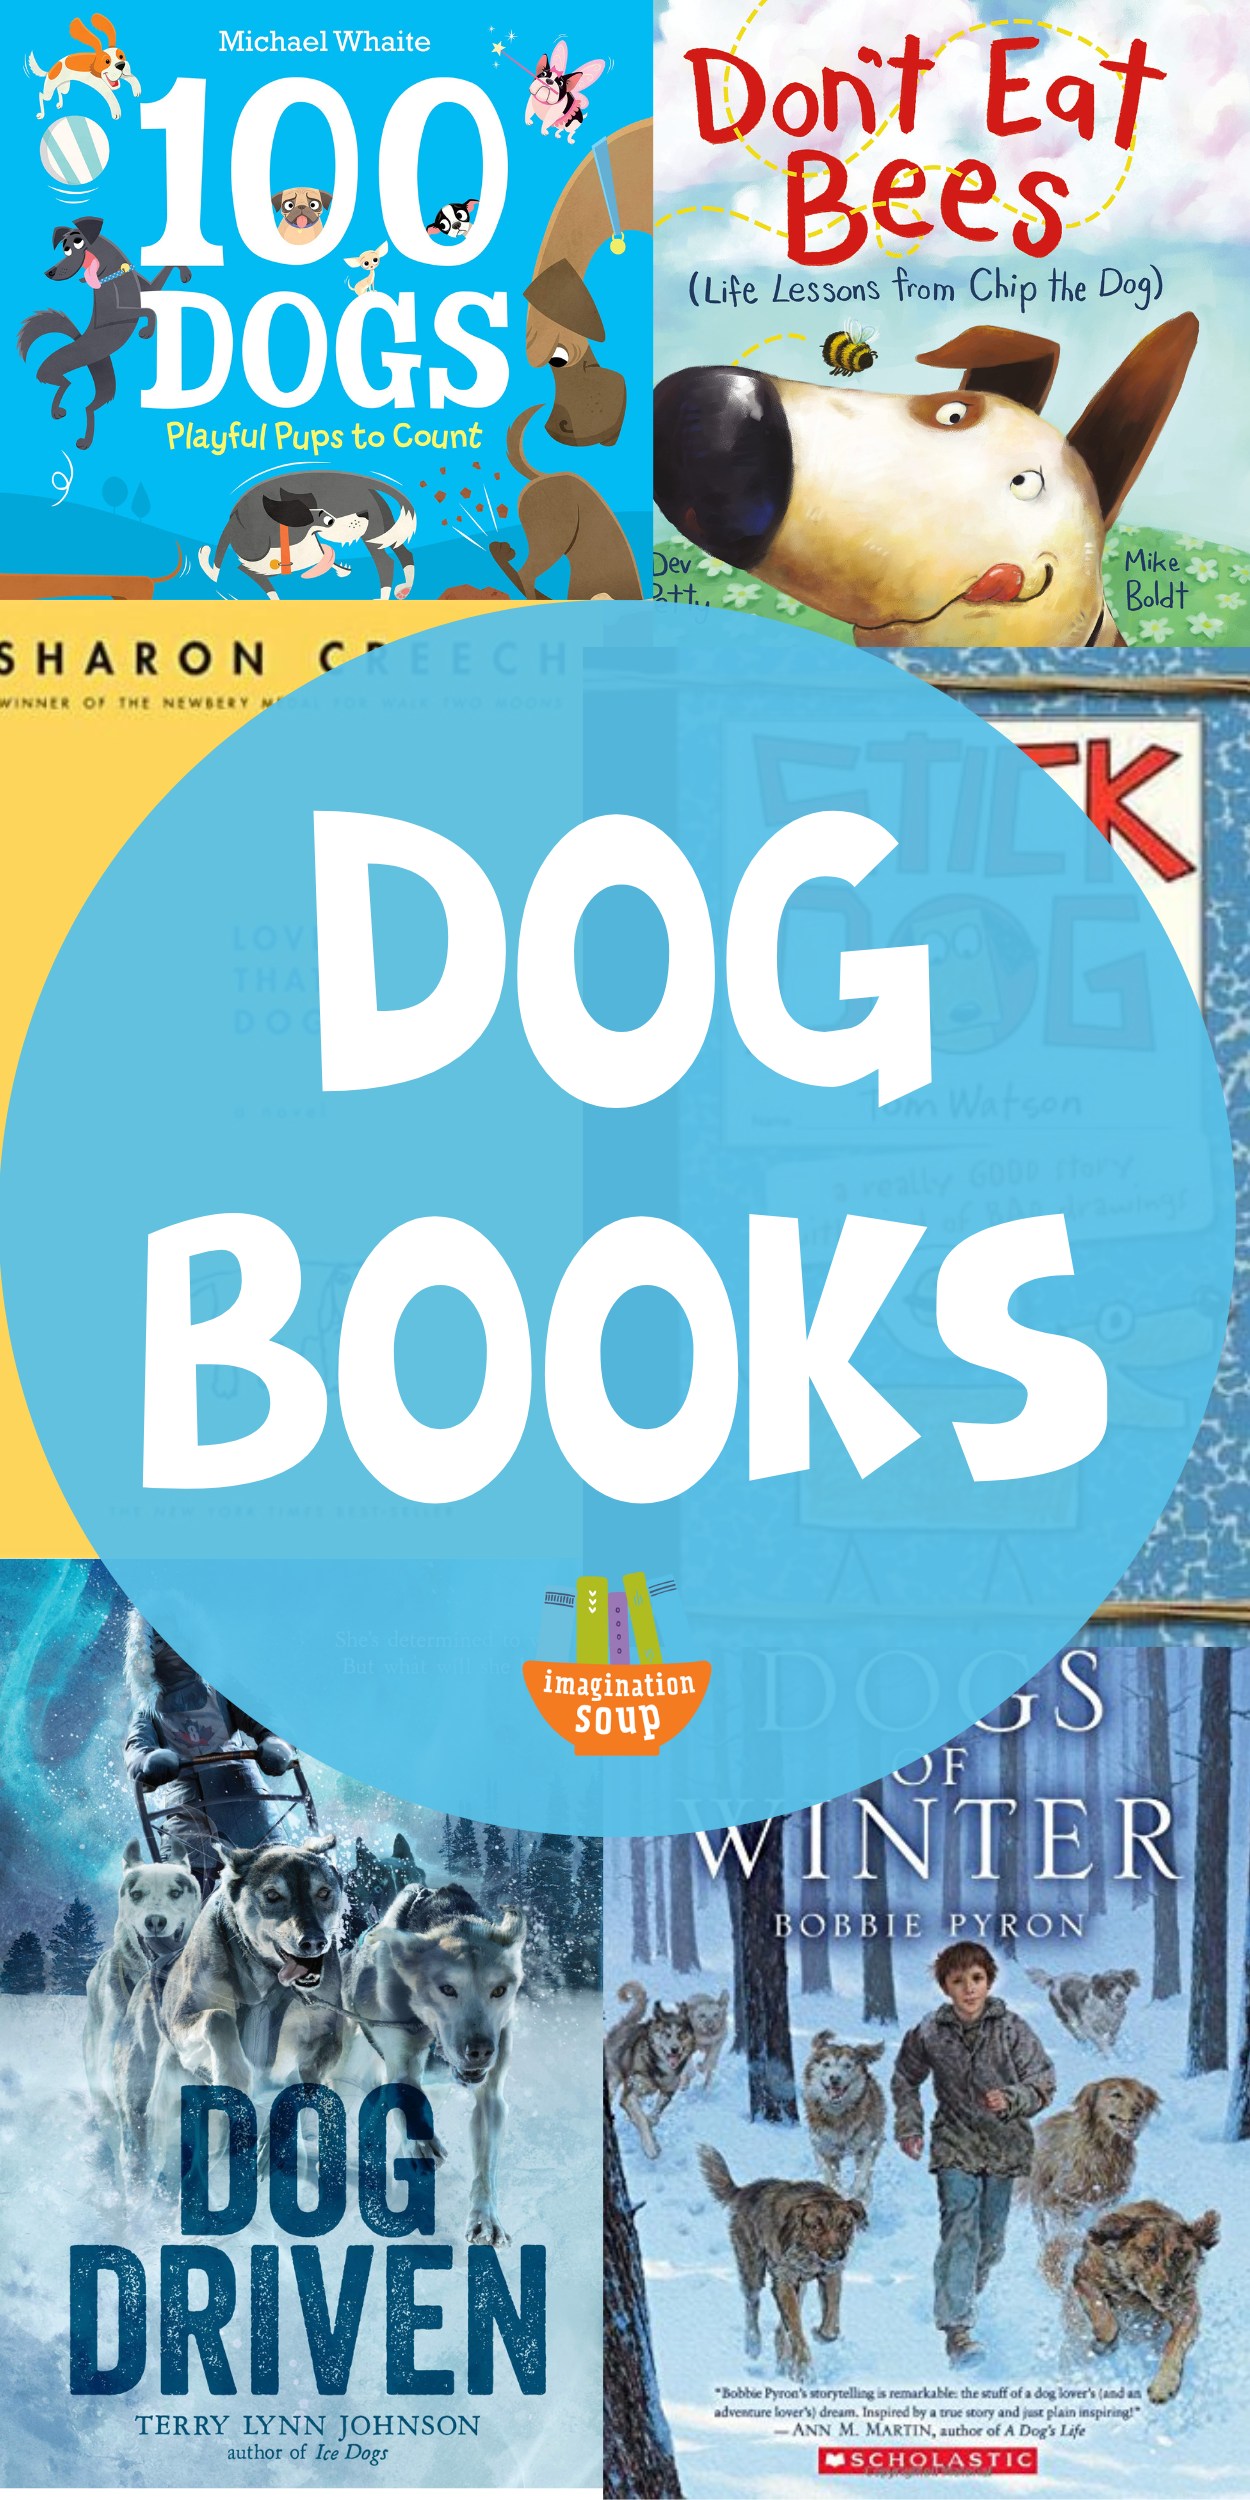 Discover the best dog books for kids of all ages.